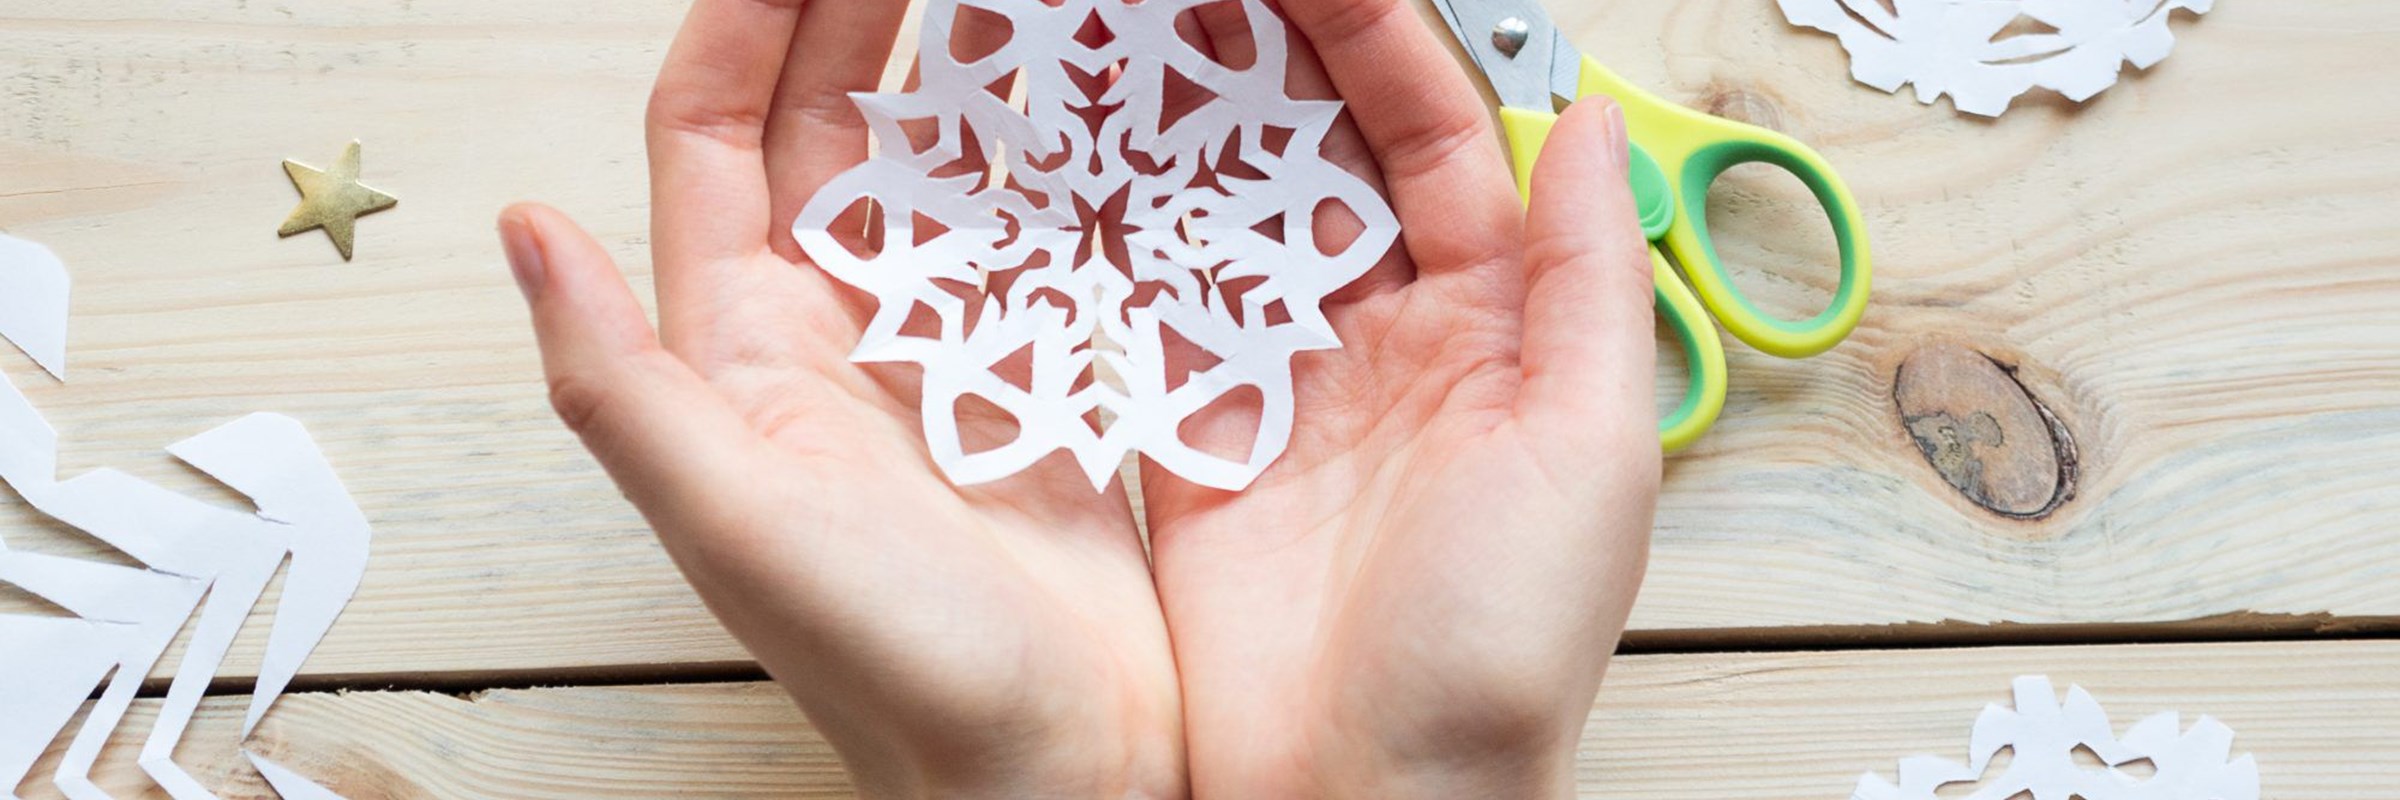 Crafters Workshop: Winter Edition for Homeschoolers